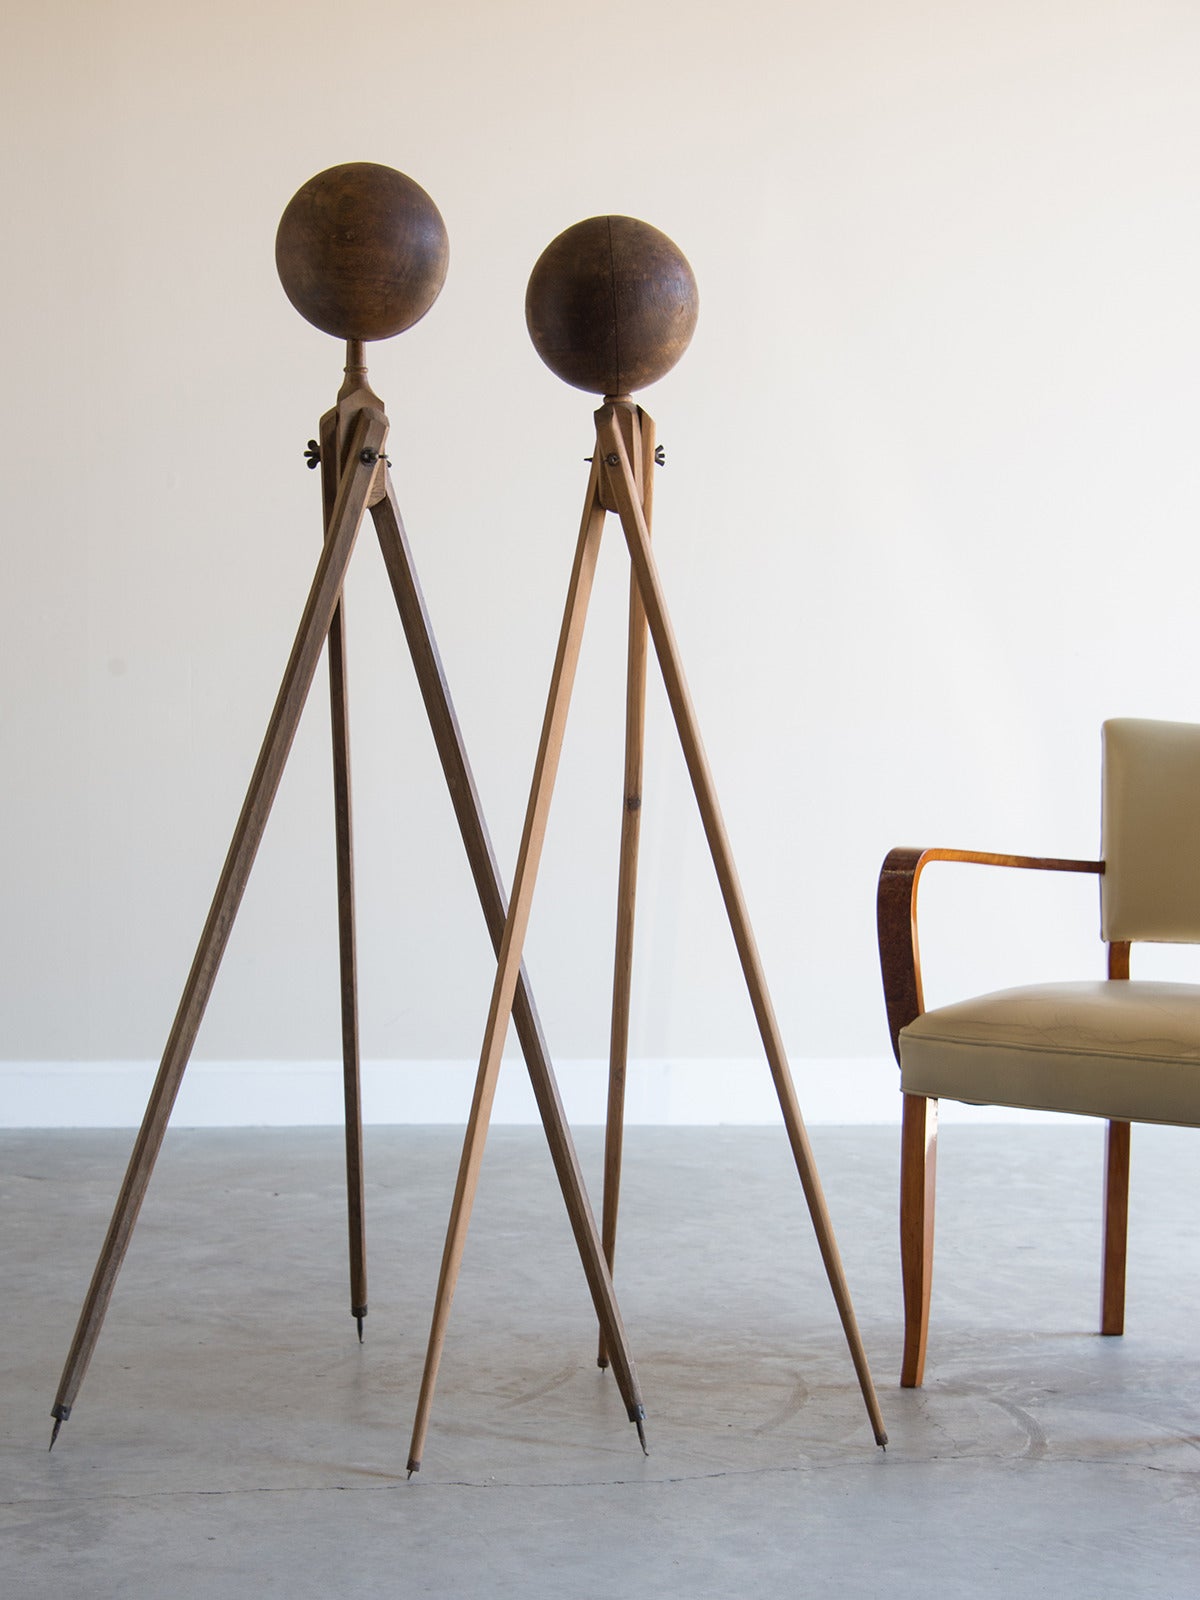 French Pair of Surveyor's Tripods Mounted with Solid Wood Spheres, France